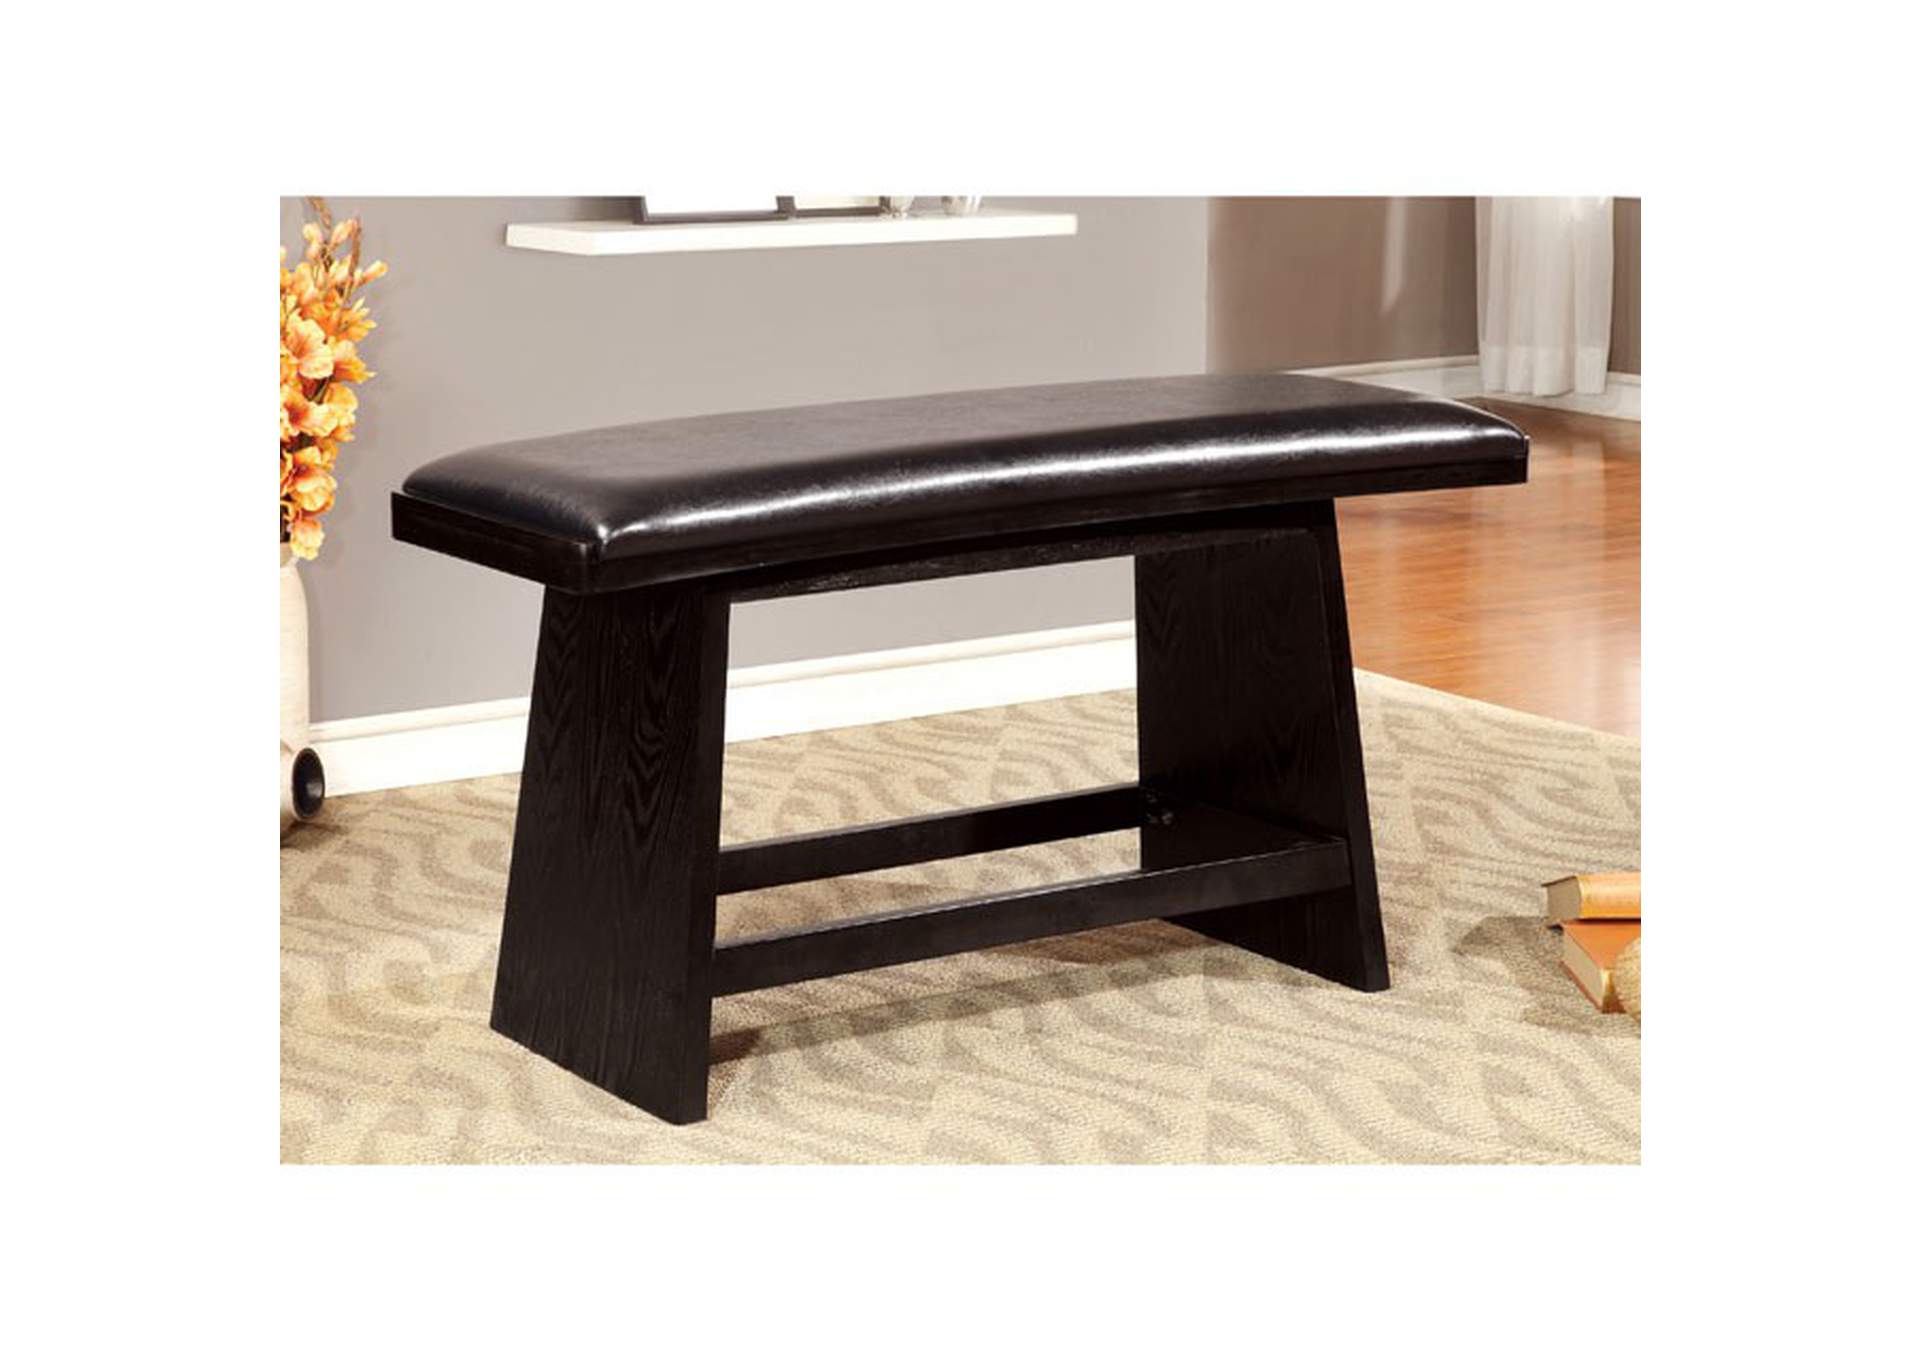 Hurley Counter Ht. Bench,Furniture of America